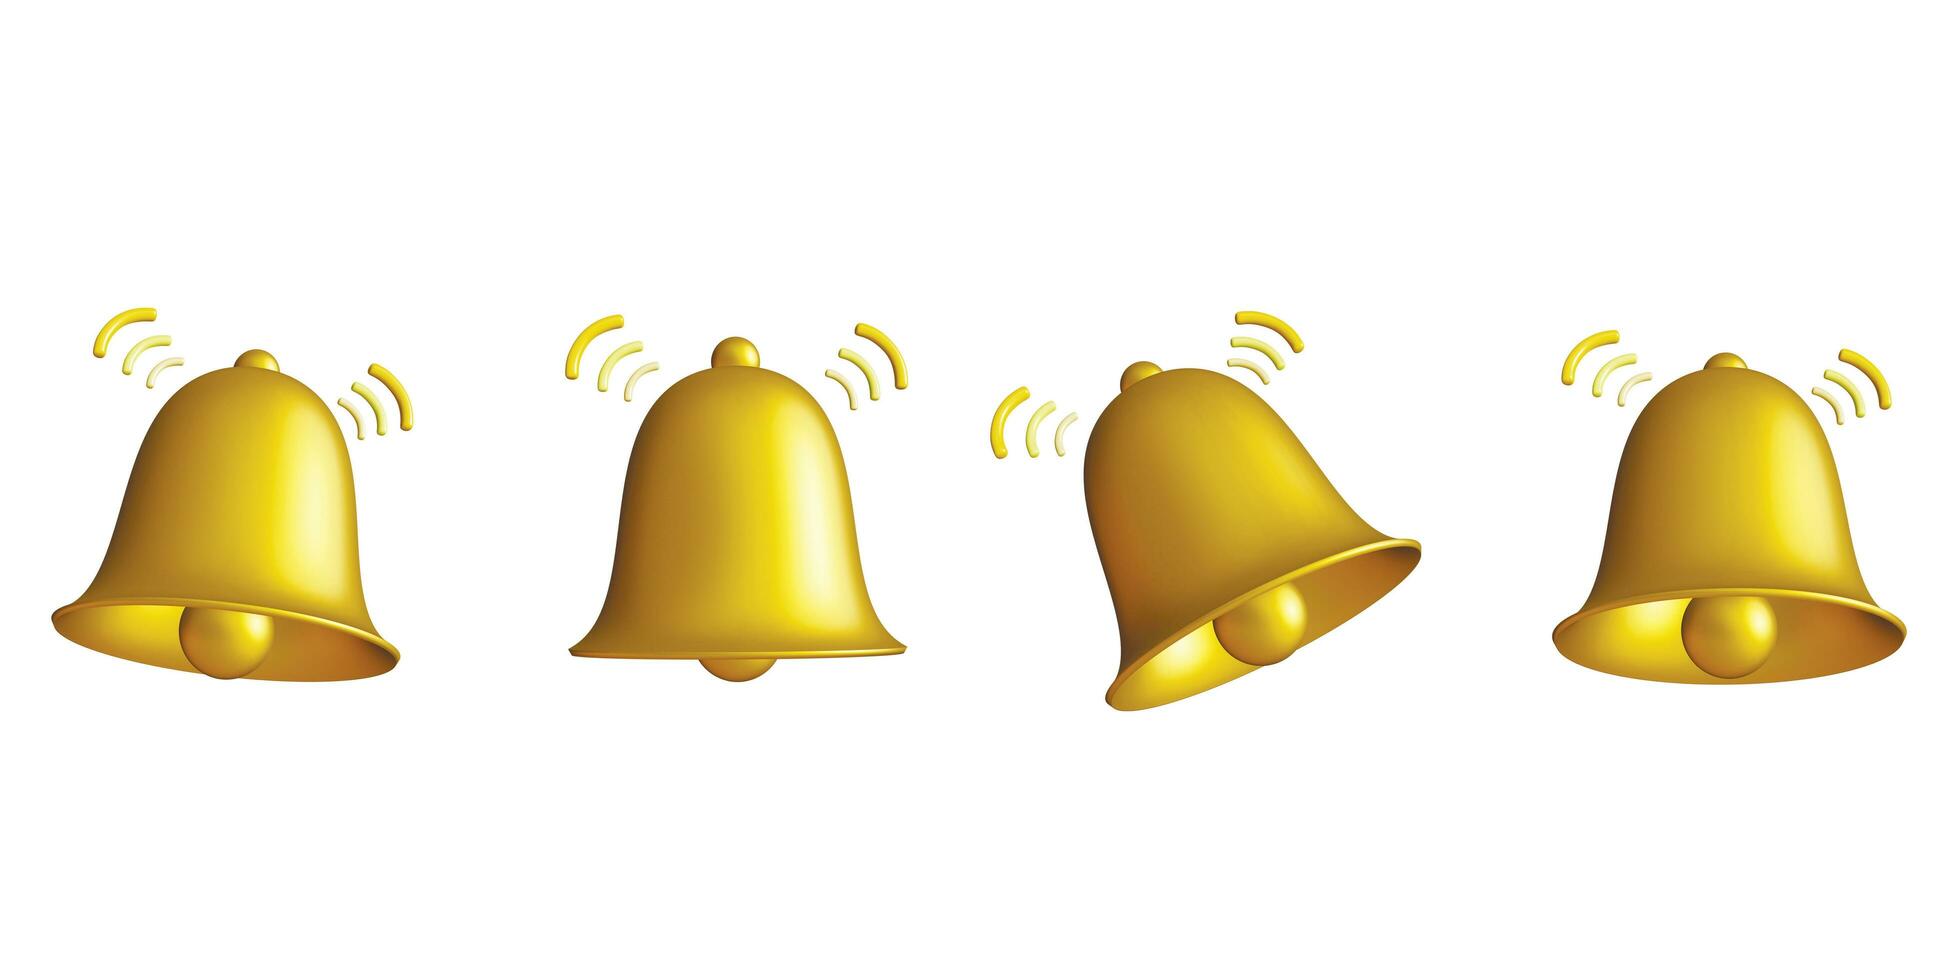 3D Bell notifications. Set of yellow bells Icon. Realistic 3d object with sound symbol. creative conceptual symbol of notifications. 3d render illustration photo